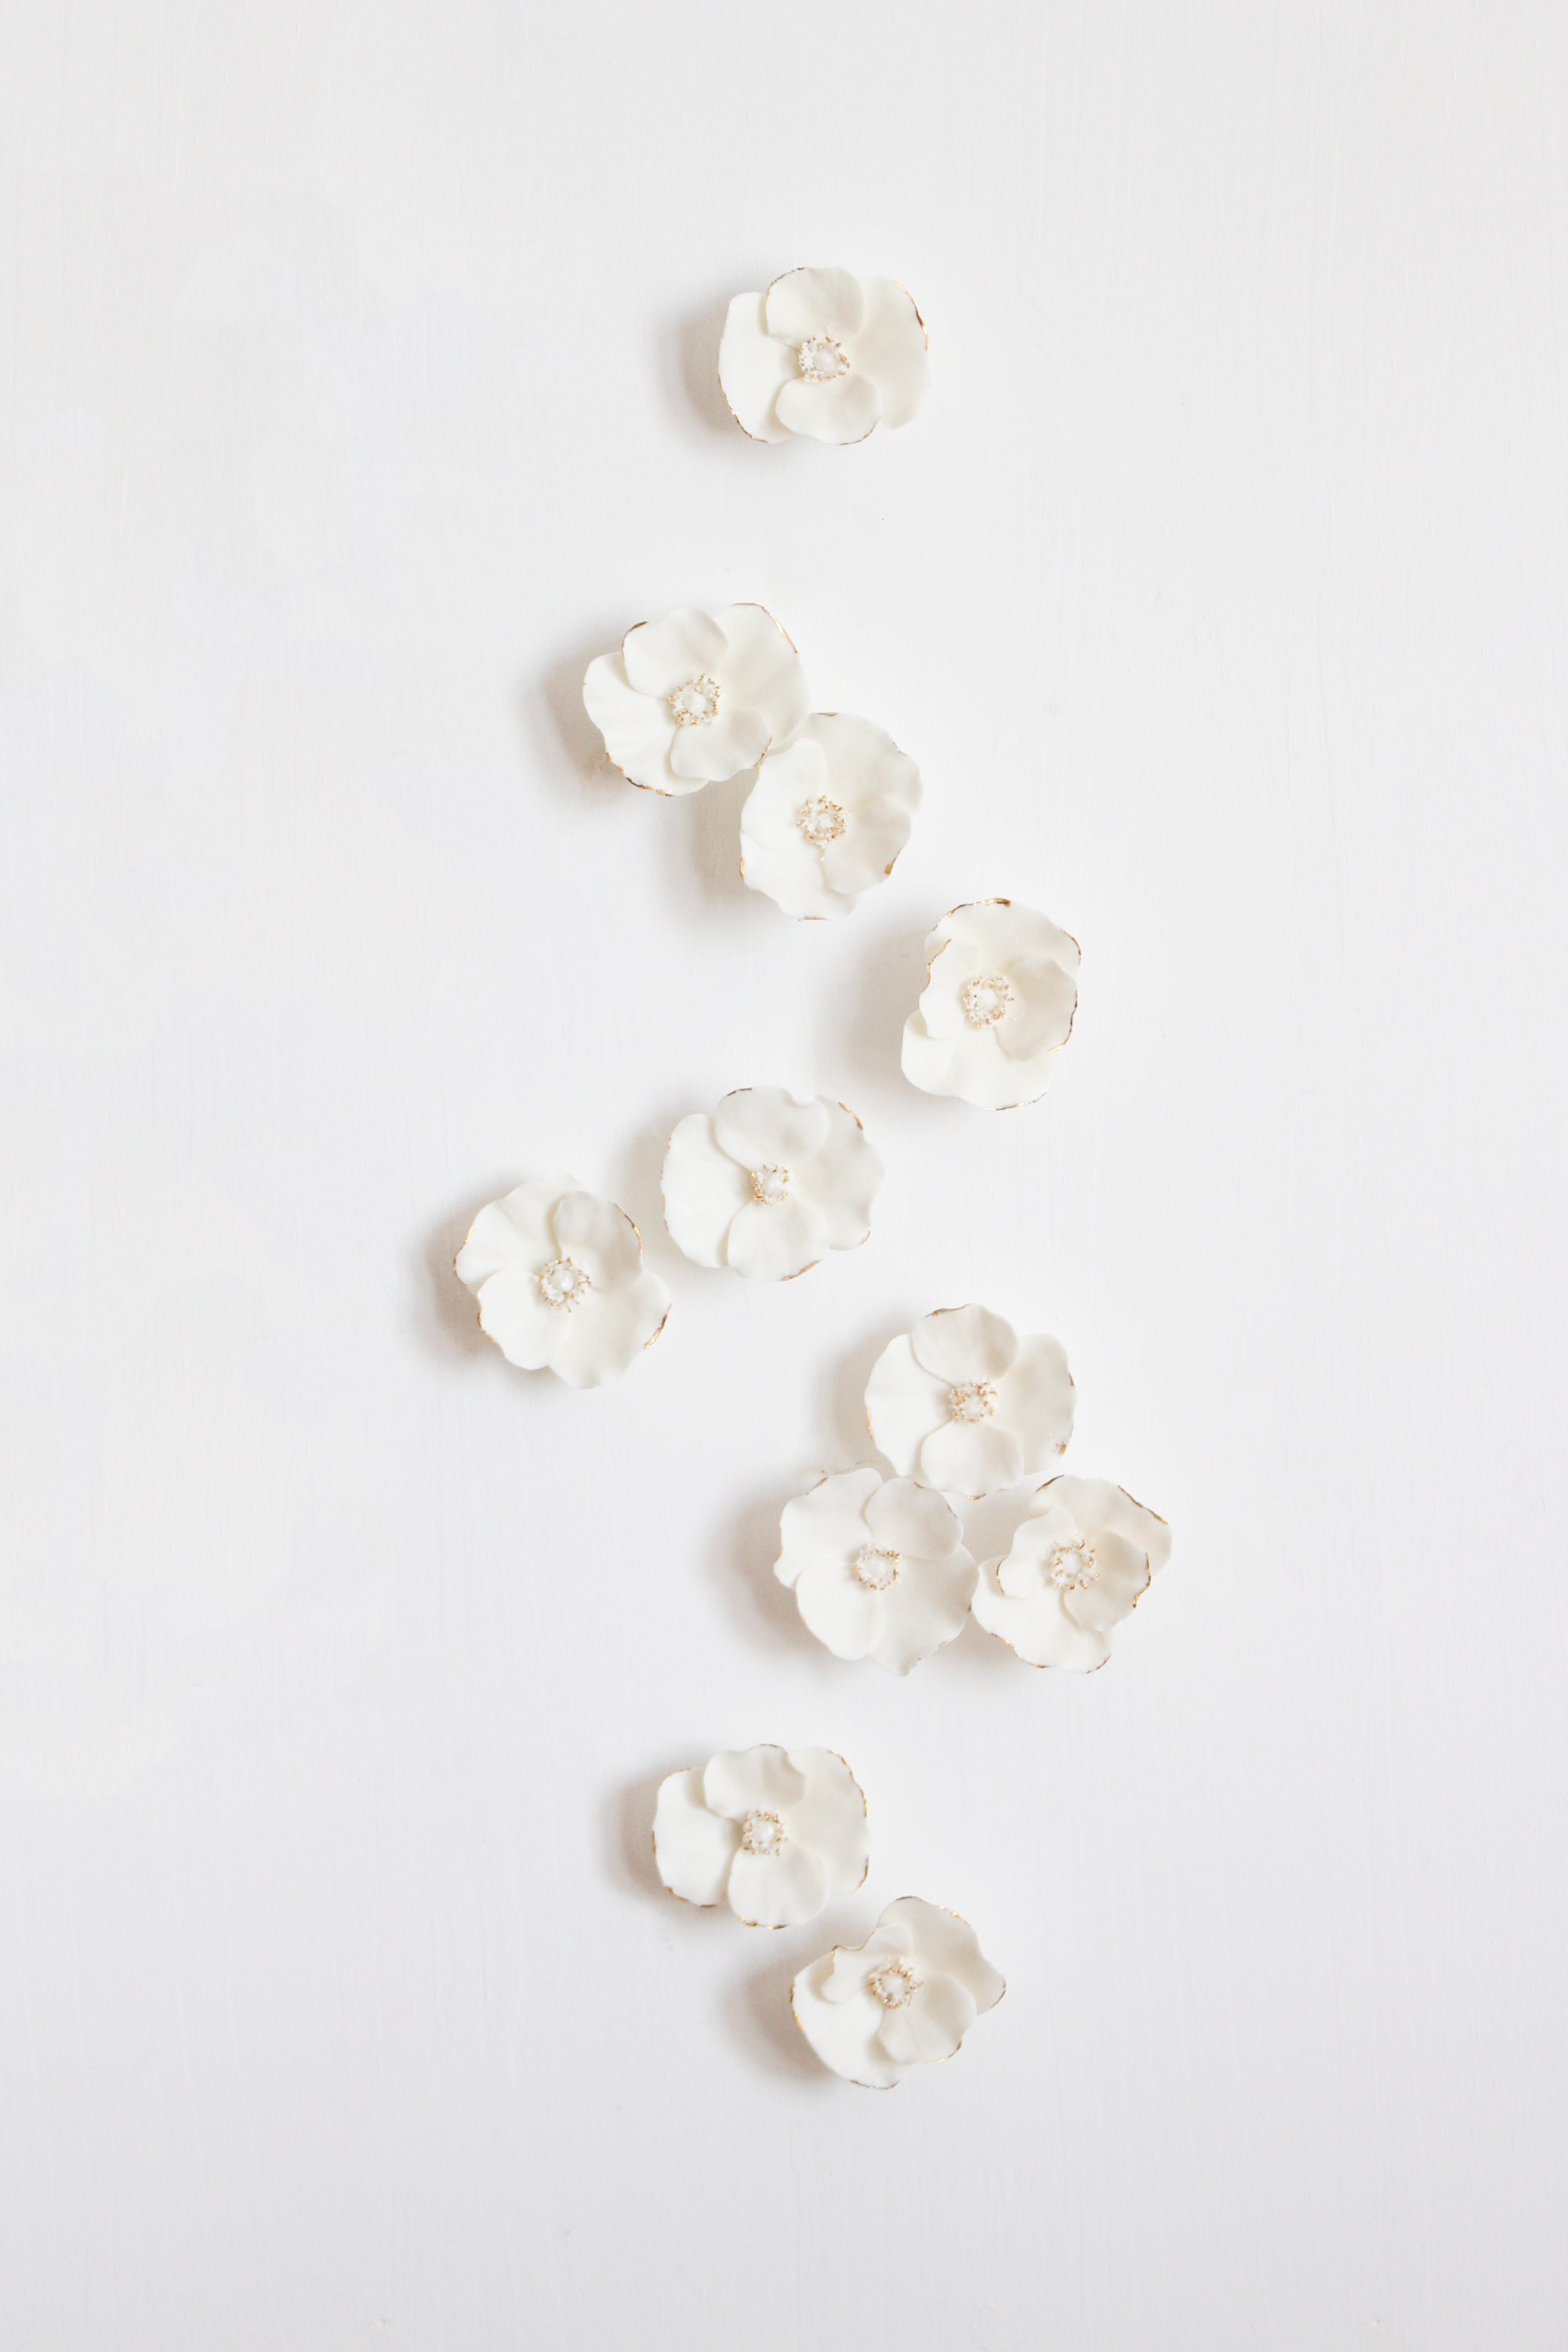 White and Gold Porcelain Poppies by Alain Granell